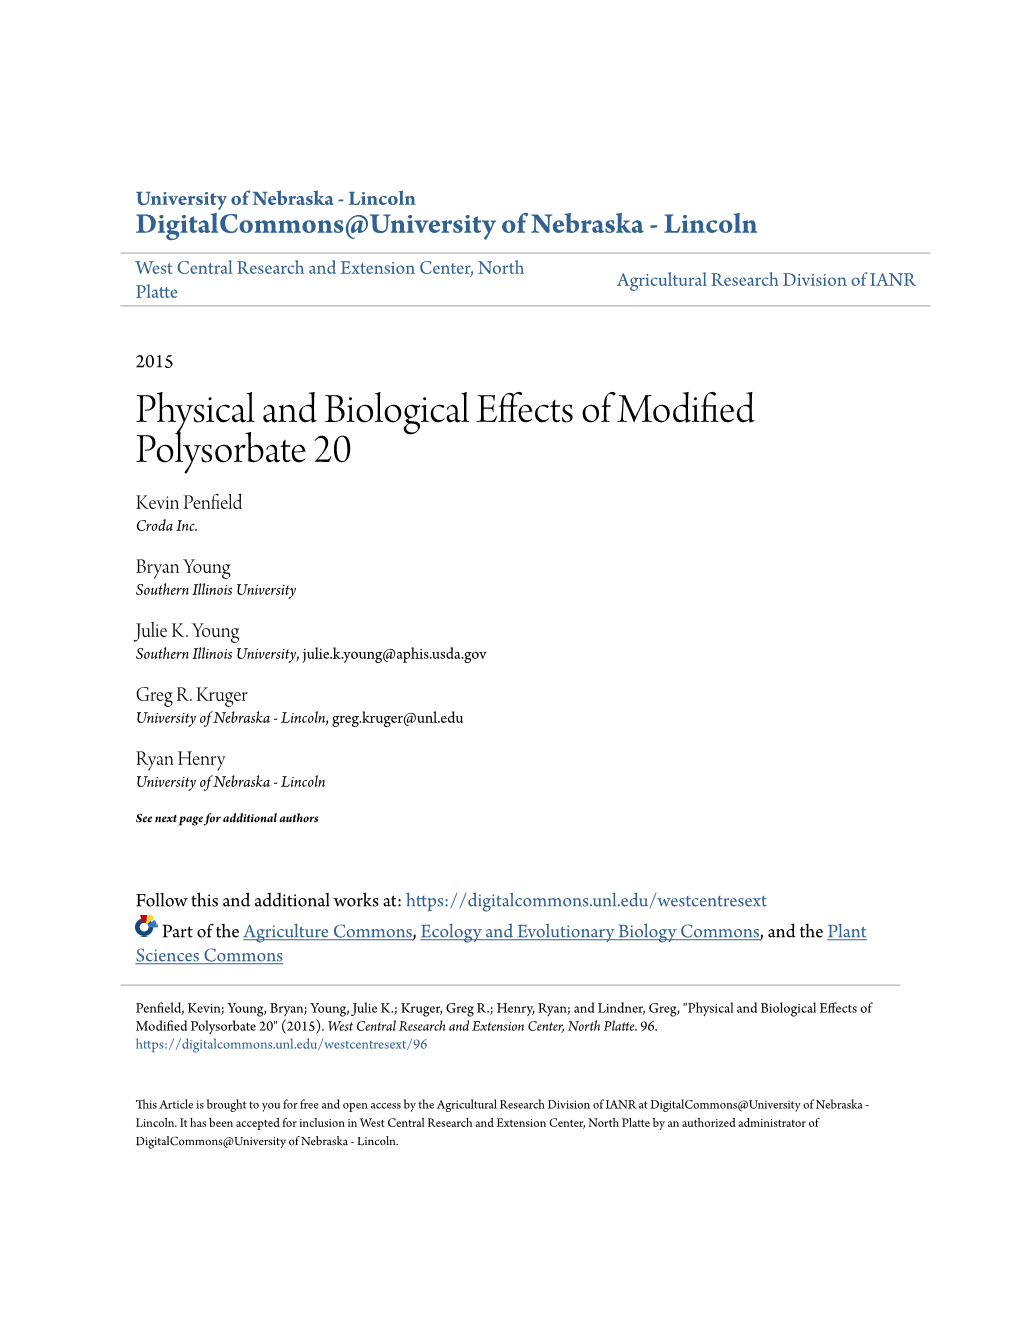 Physical and Biological Effects of Modified Polysorbate 20 Kevin Penfield Croda Inc